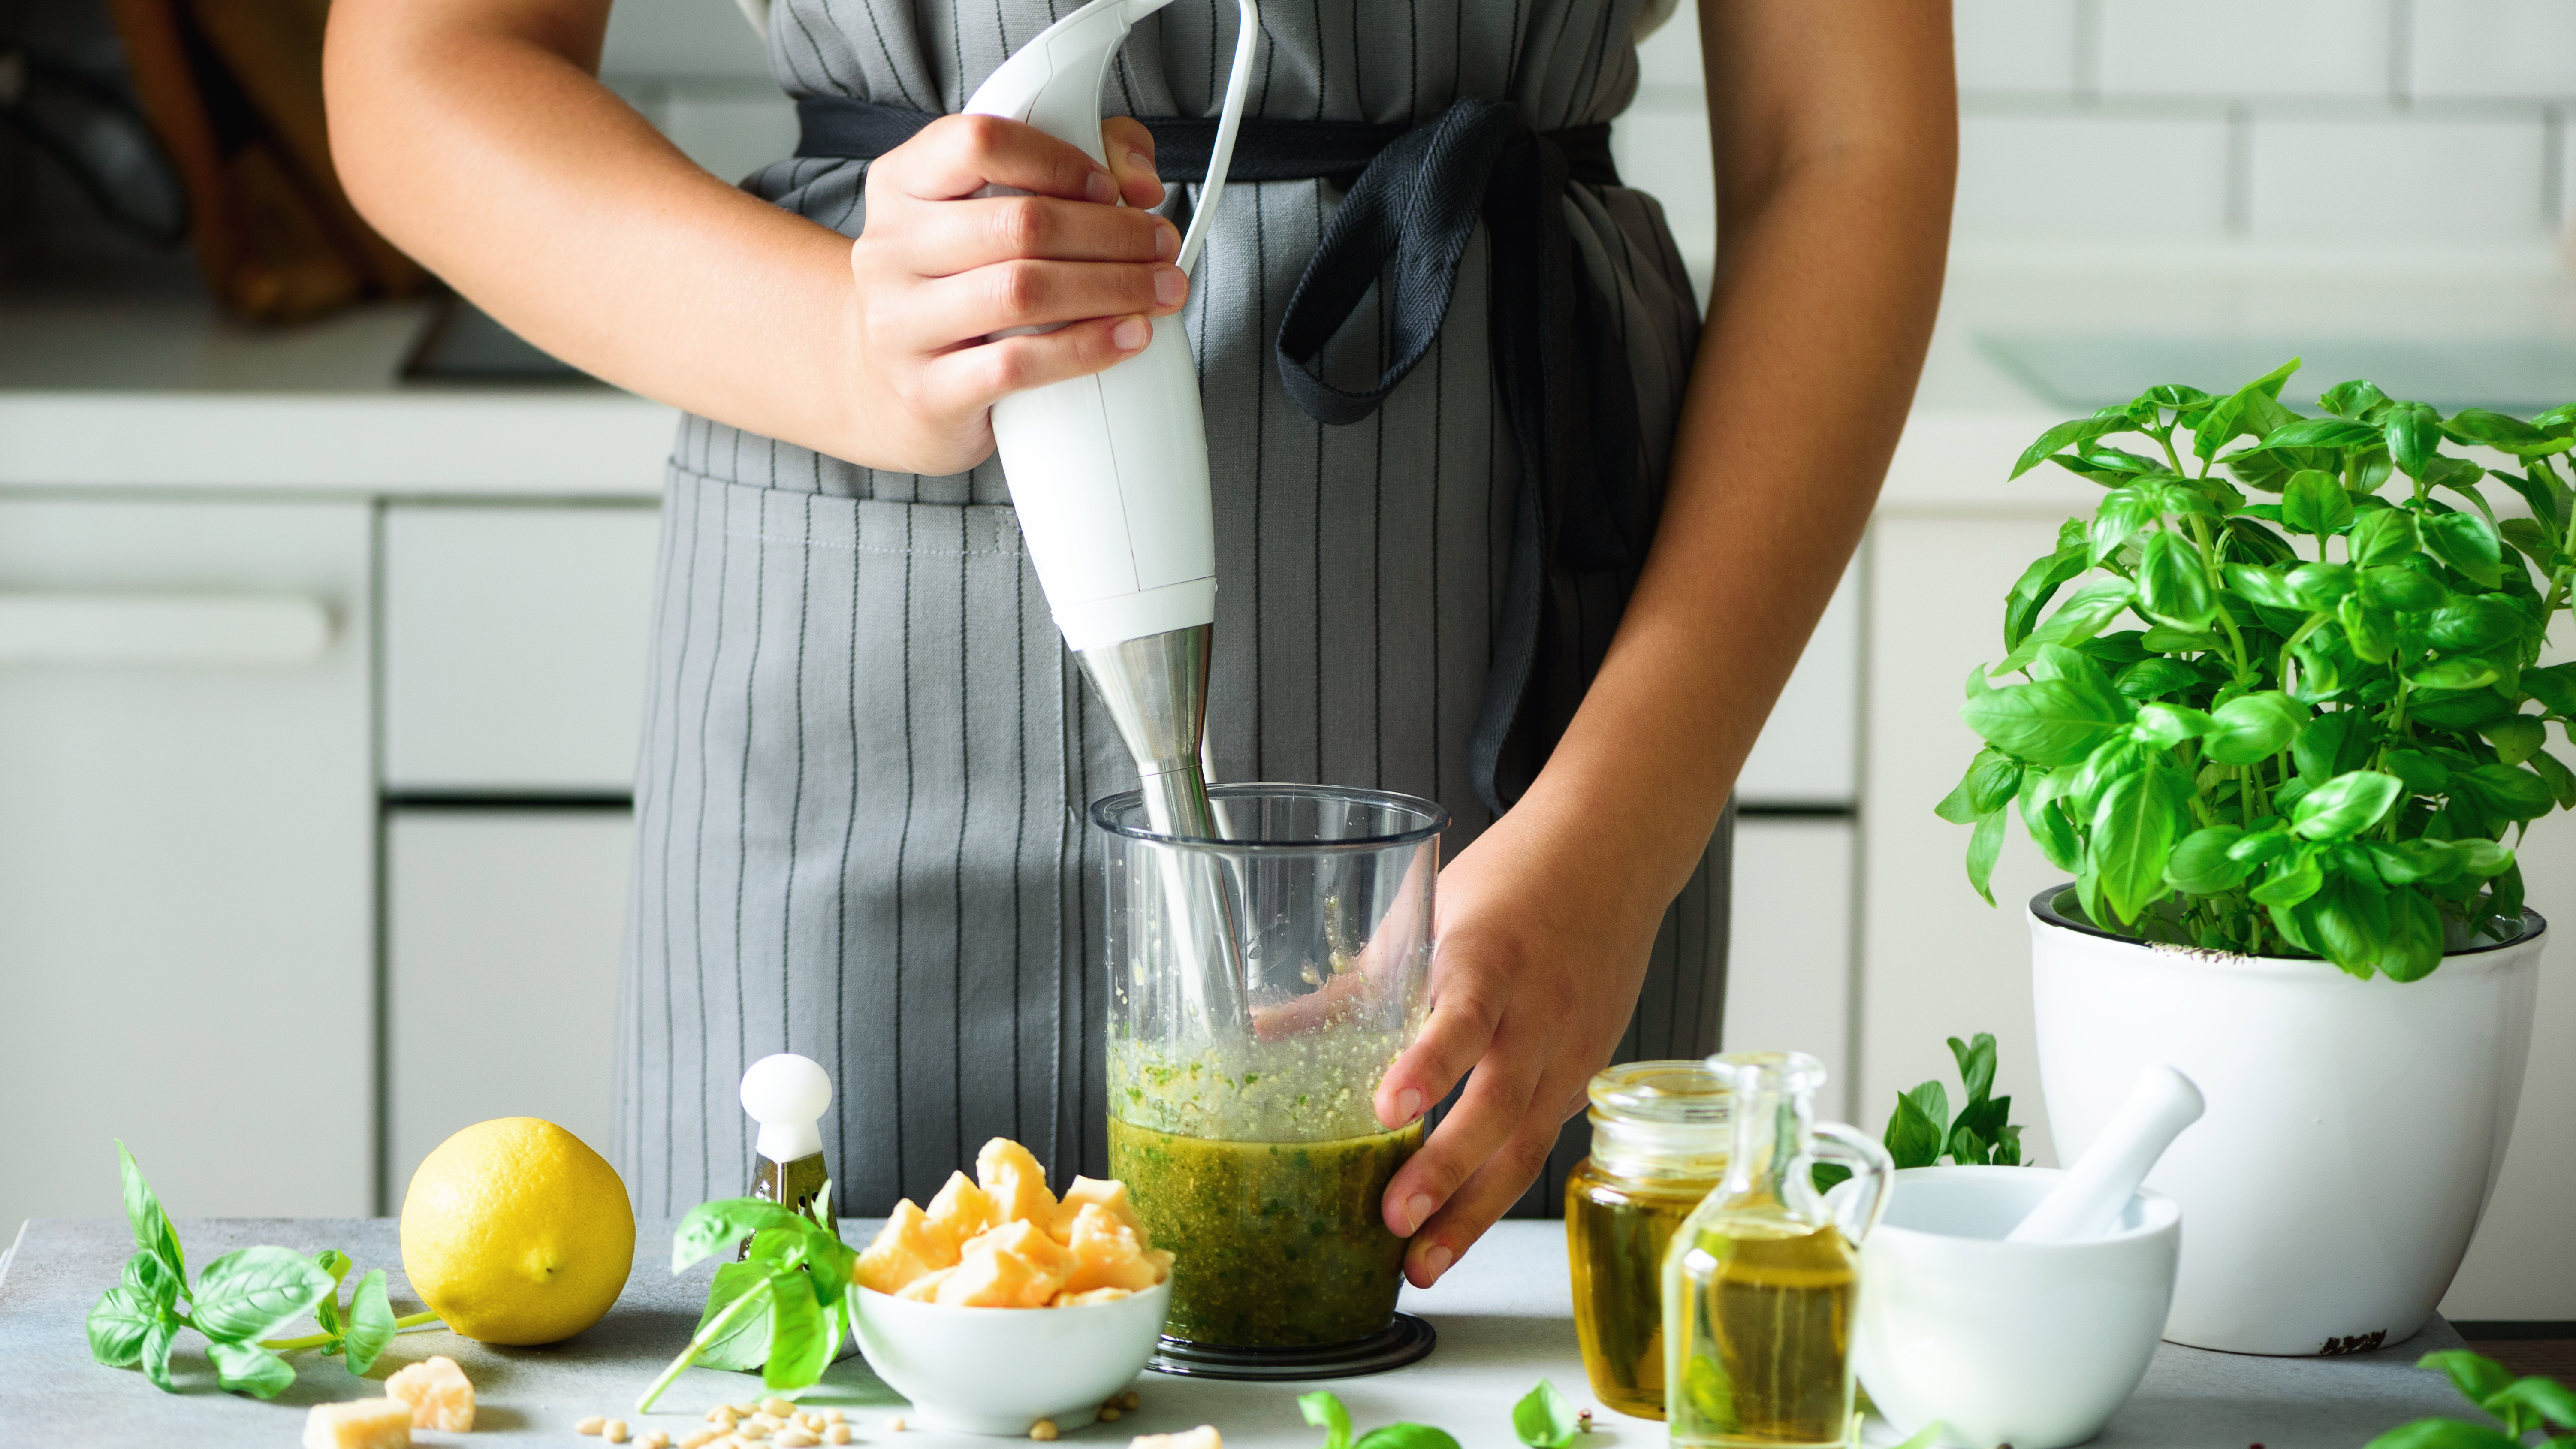 How To Clean An Immersion Blender